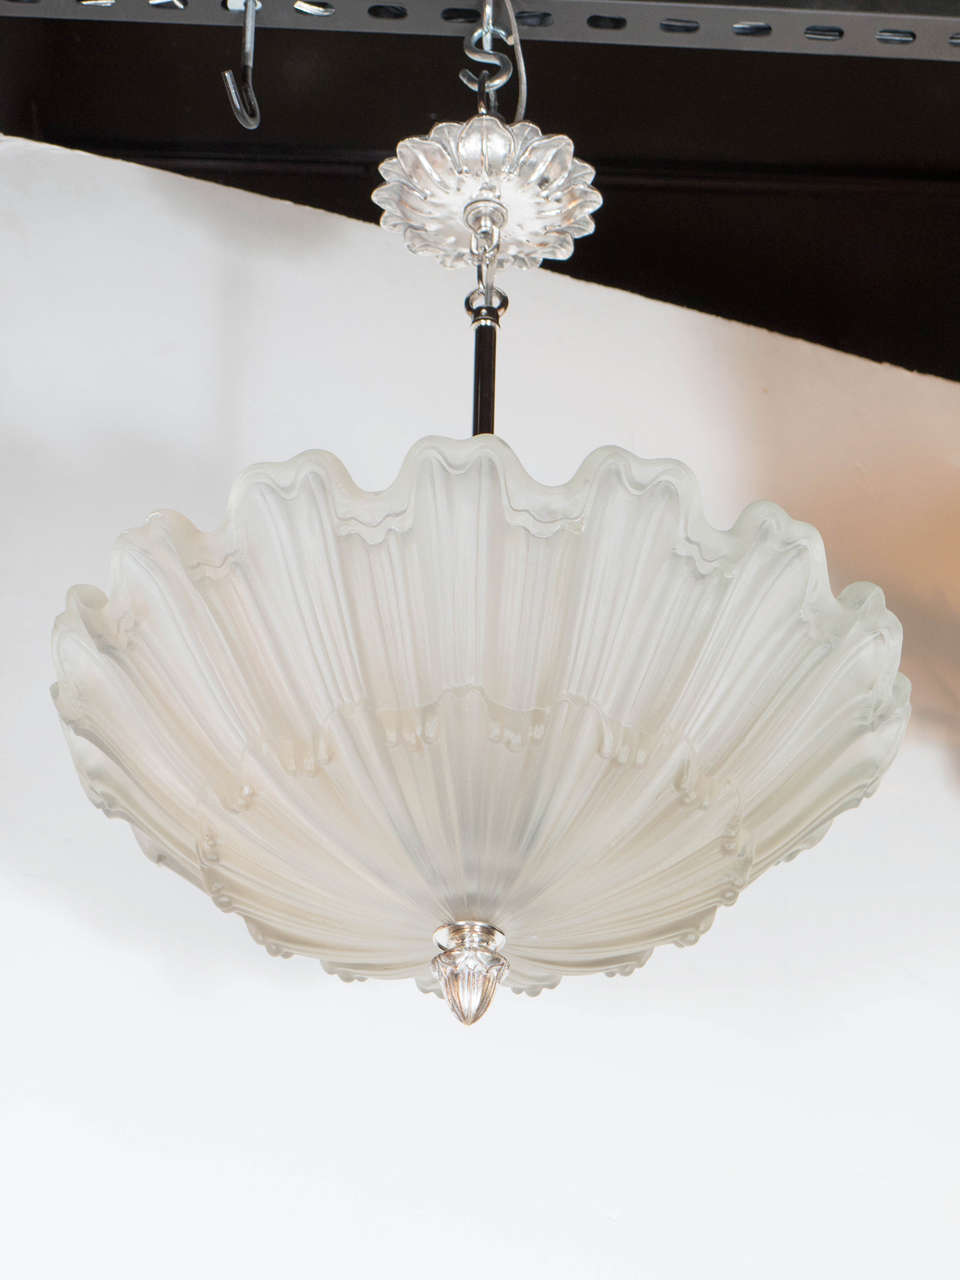 This exquisite Art Deco chandelier in the manner of Lalique features a frosted glass bowl with scalloped detailing which repeats on itself at alternating heights, the nickel canopy and finial are original and feature laurel detailing which extends